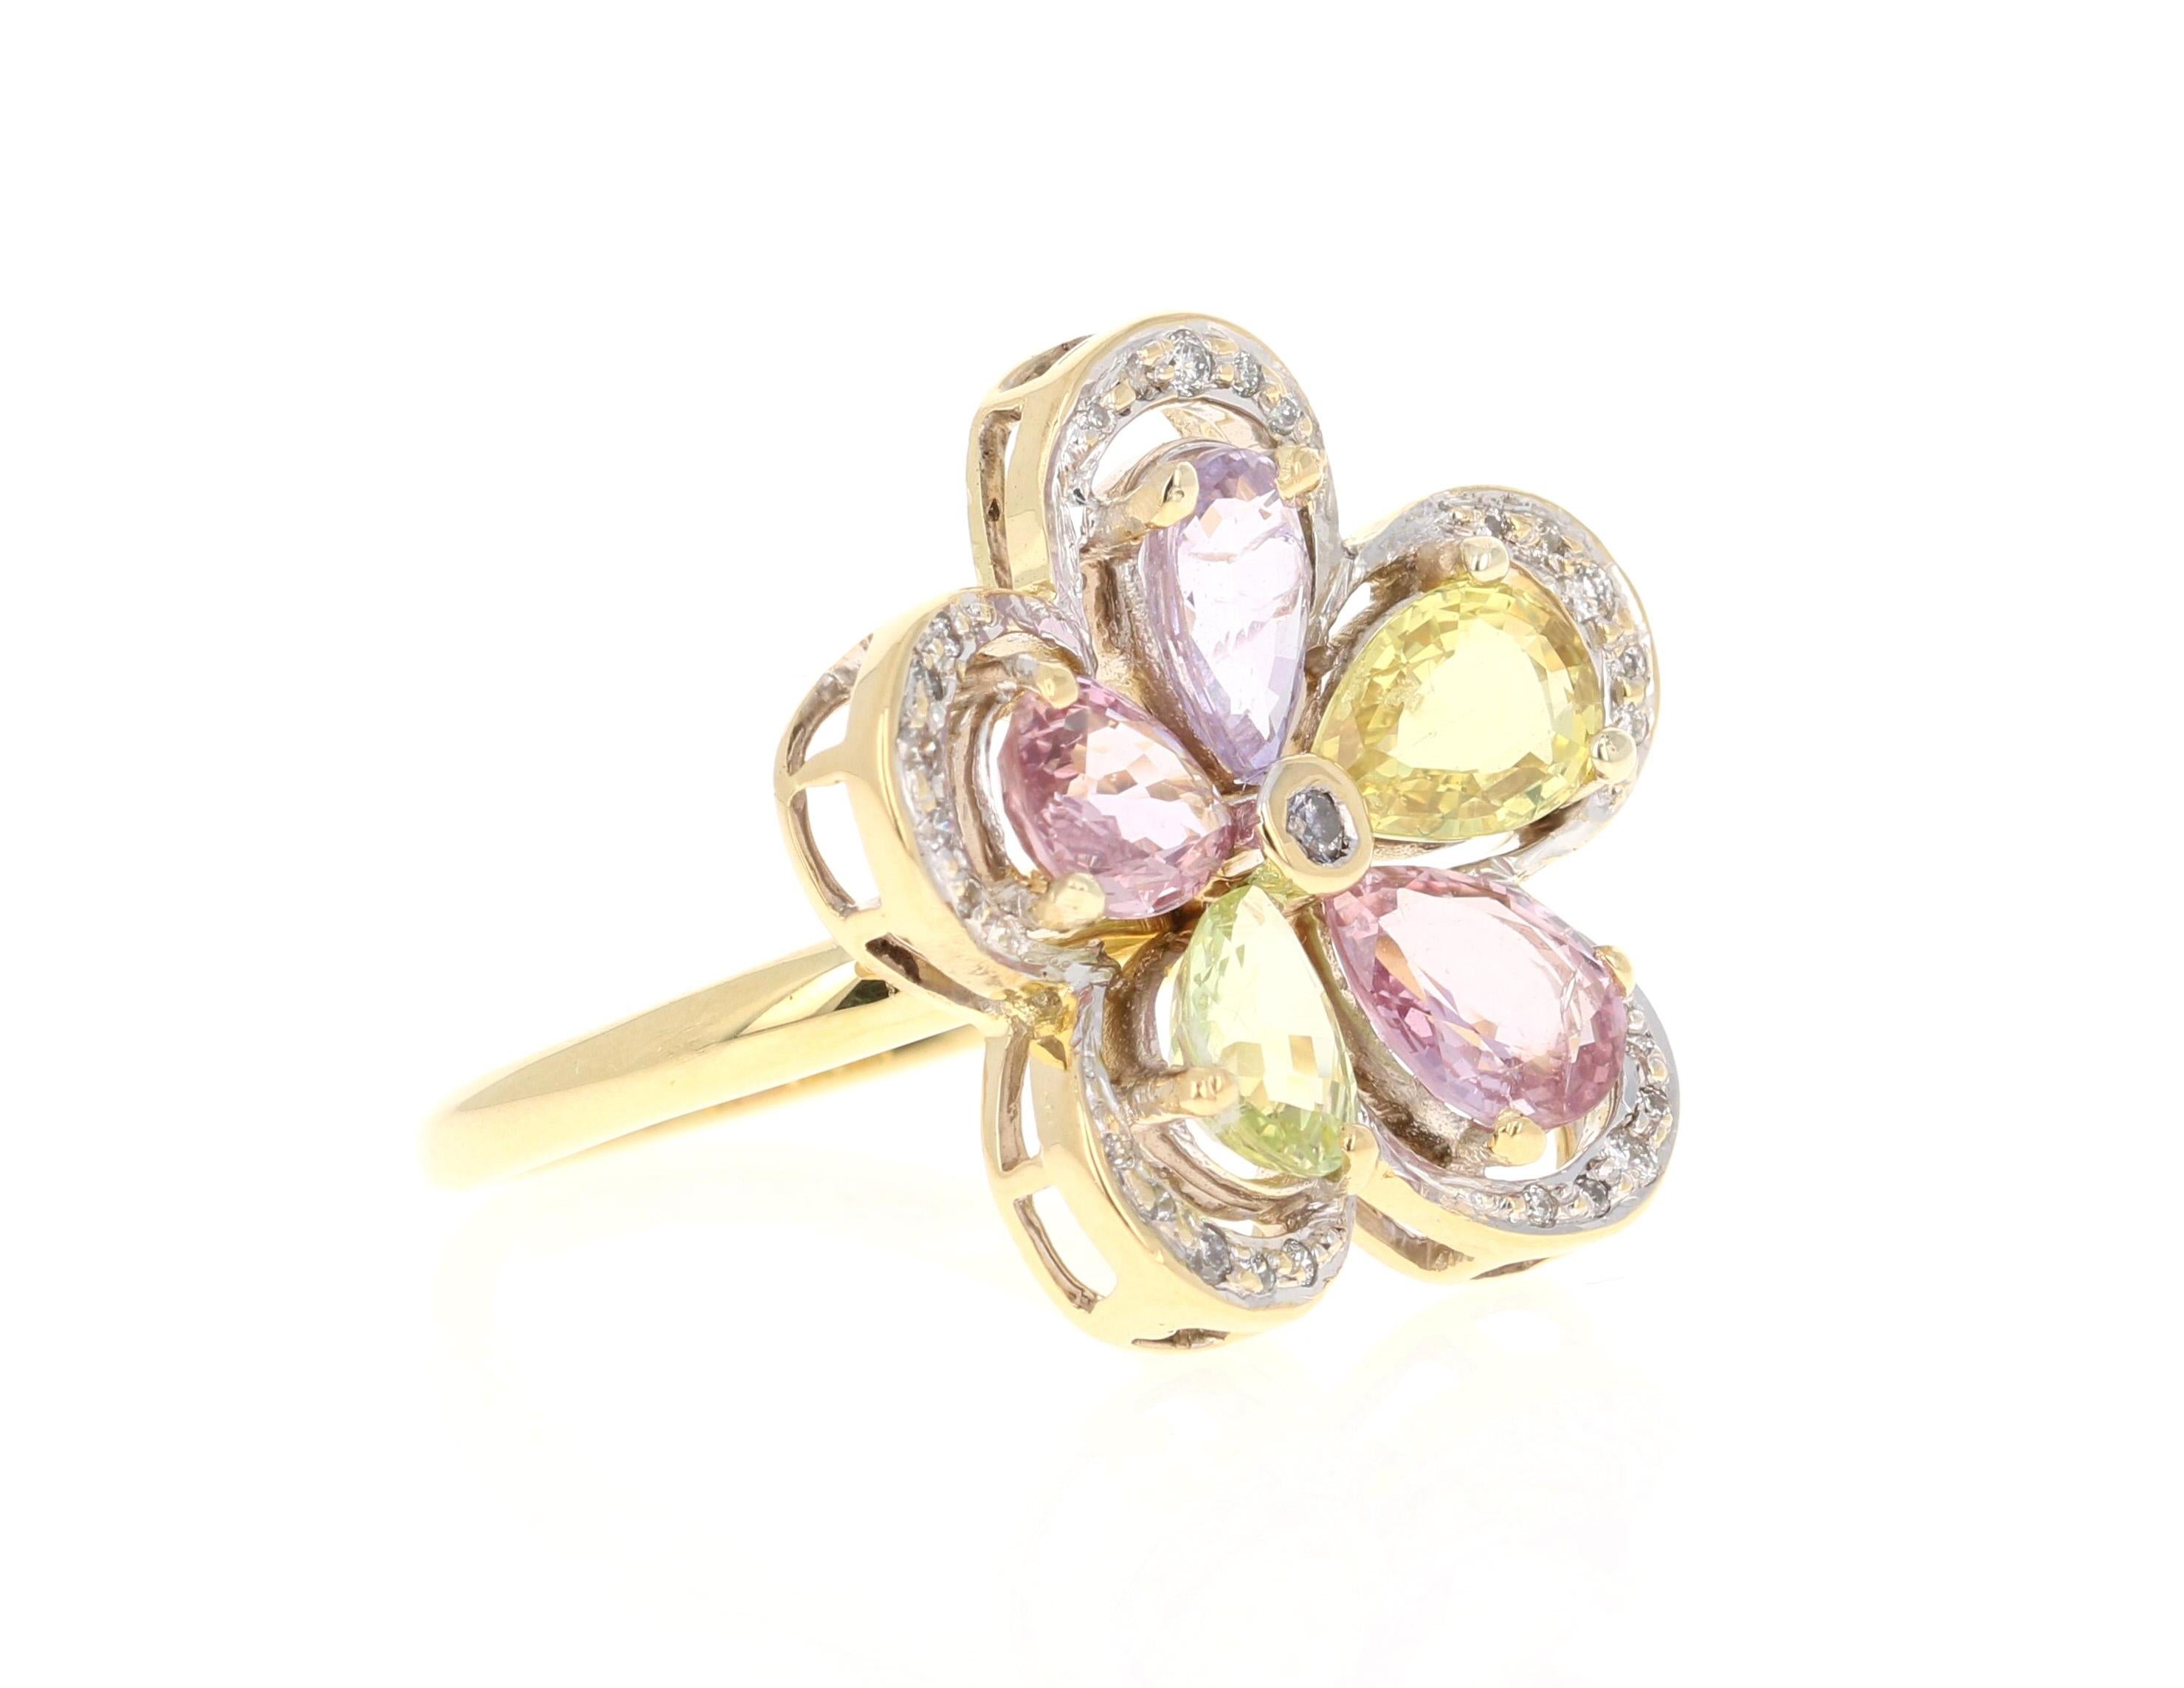 Beautiful and Unique Multi Sapphire & Diamond Flower Ring

This ring has 5 Pear Cut Multi-Colored Sapphires that weigh 4.24 Carats. It also has 25 Round Cut Diamonds that weigh 0.17 Carats. Clarity: VS and Color: H. The total carat weight of the